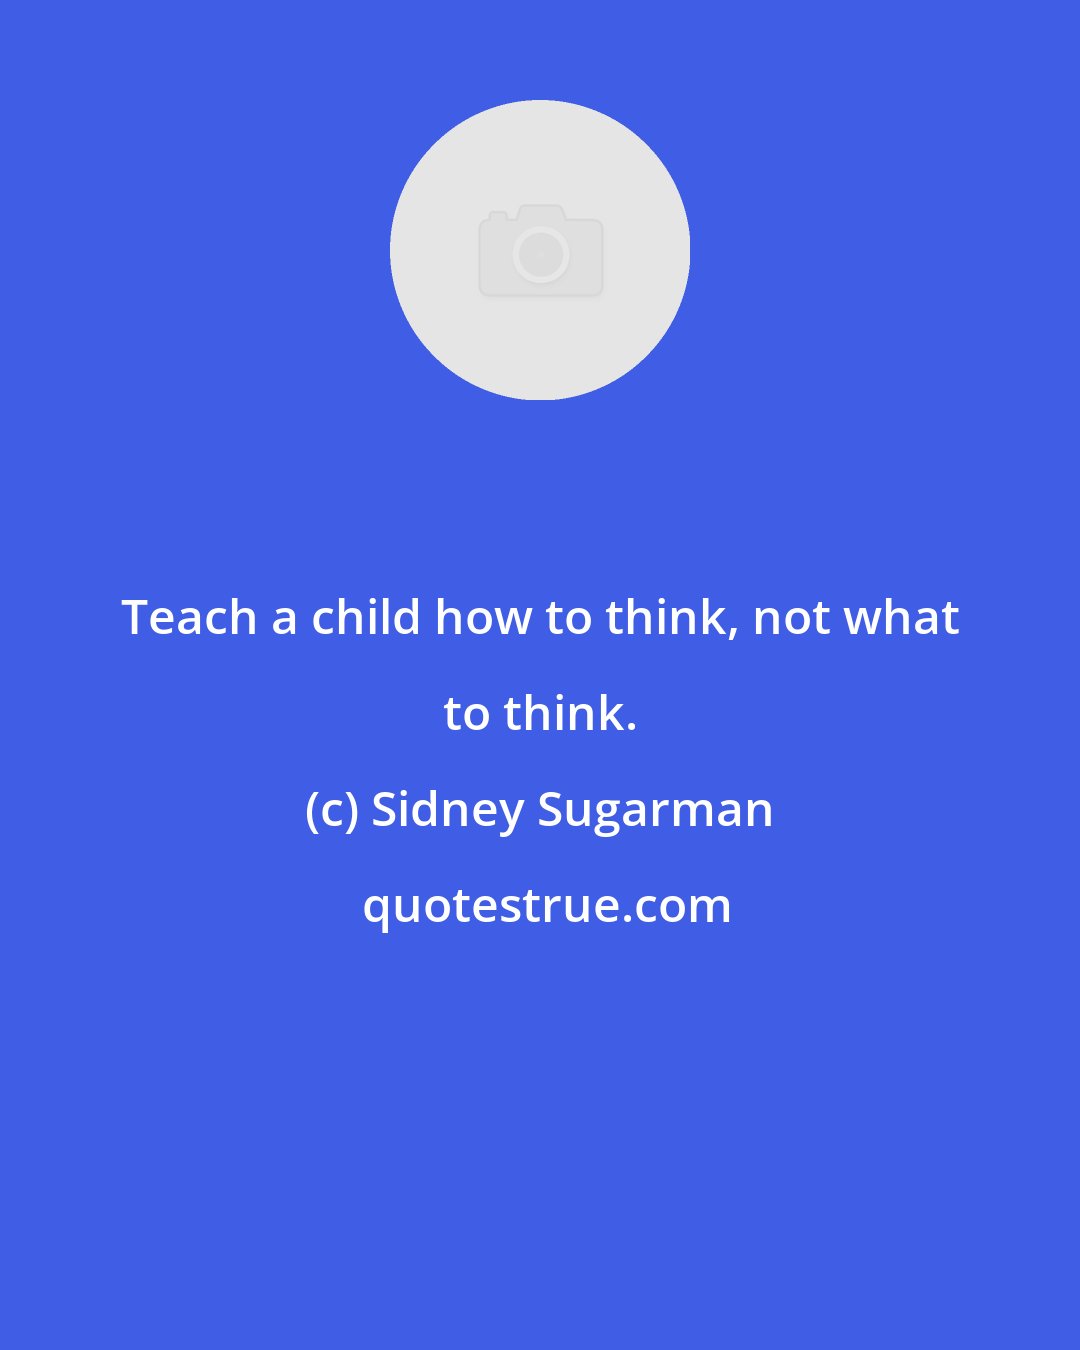 Sidney Sugarman: Teach a child how to think, not what to think.